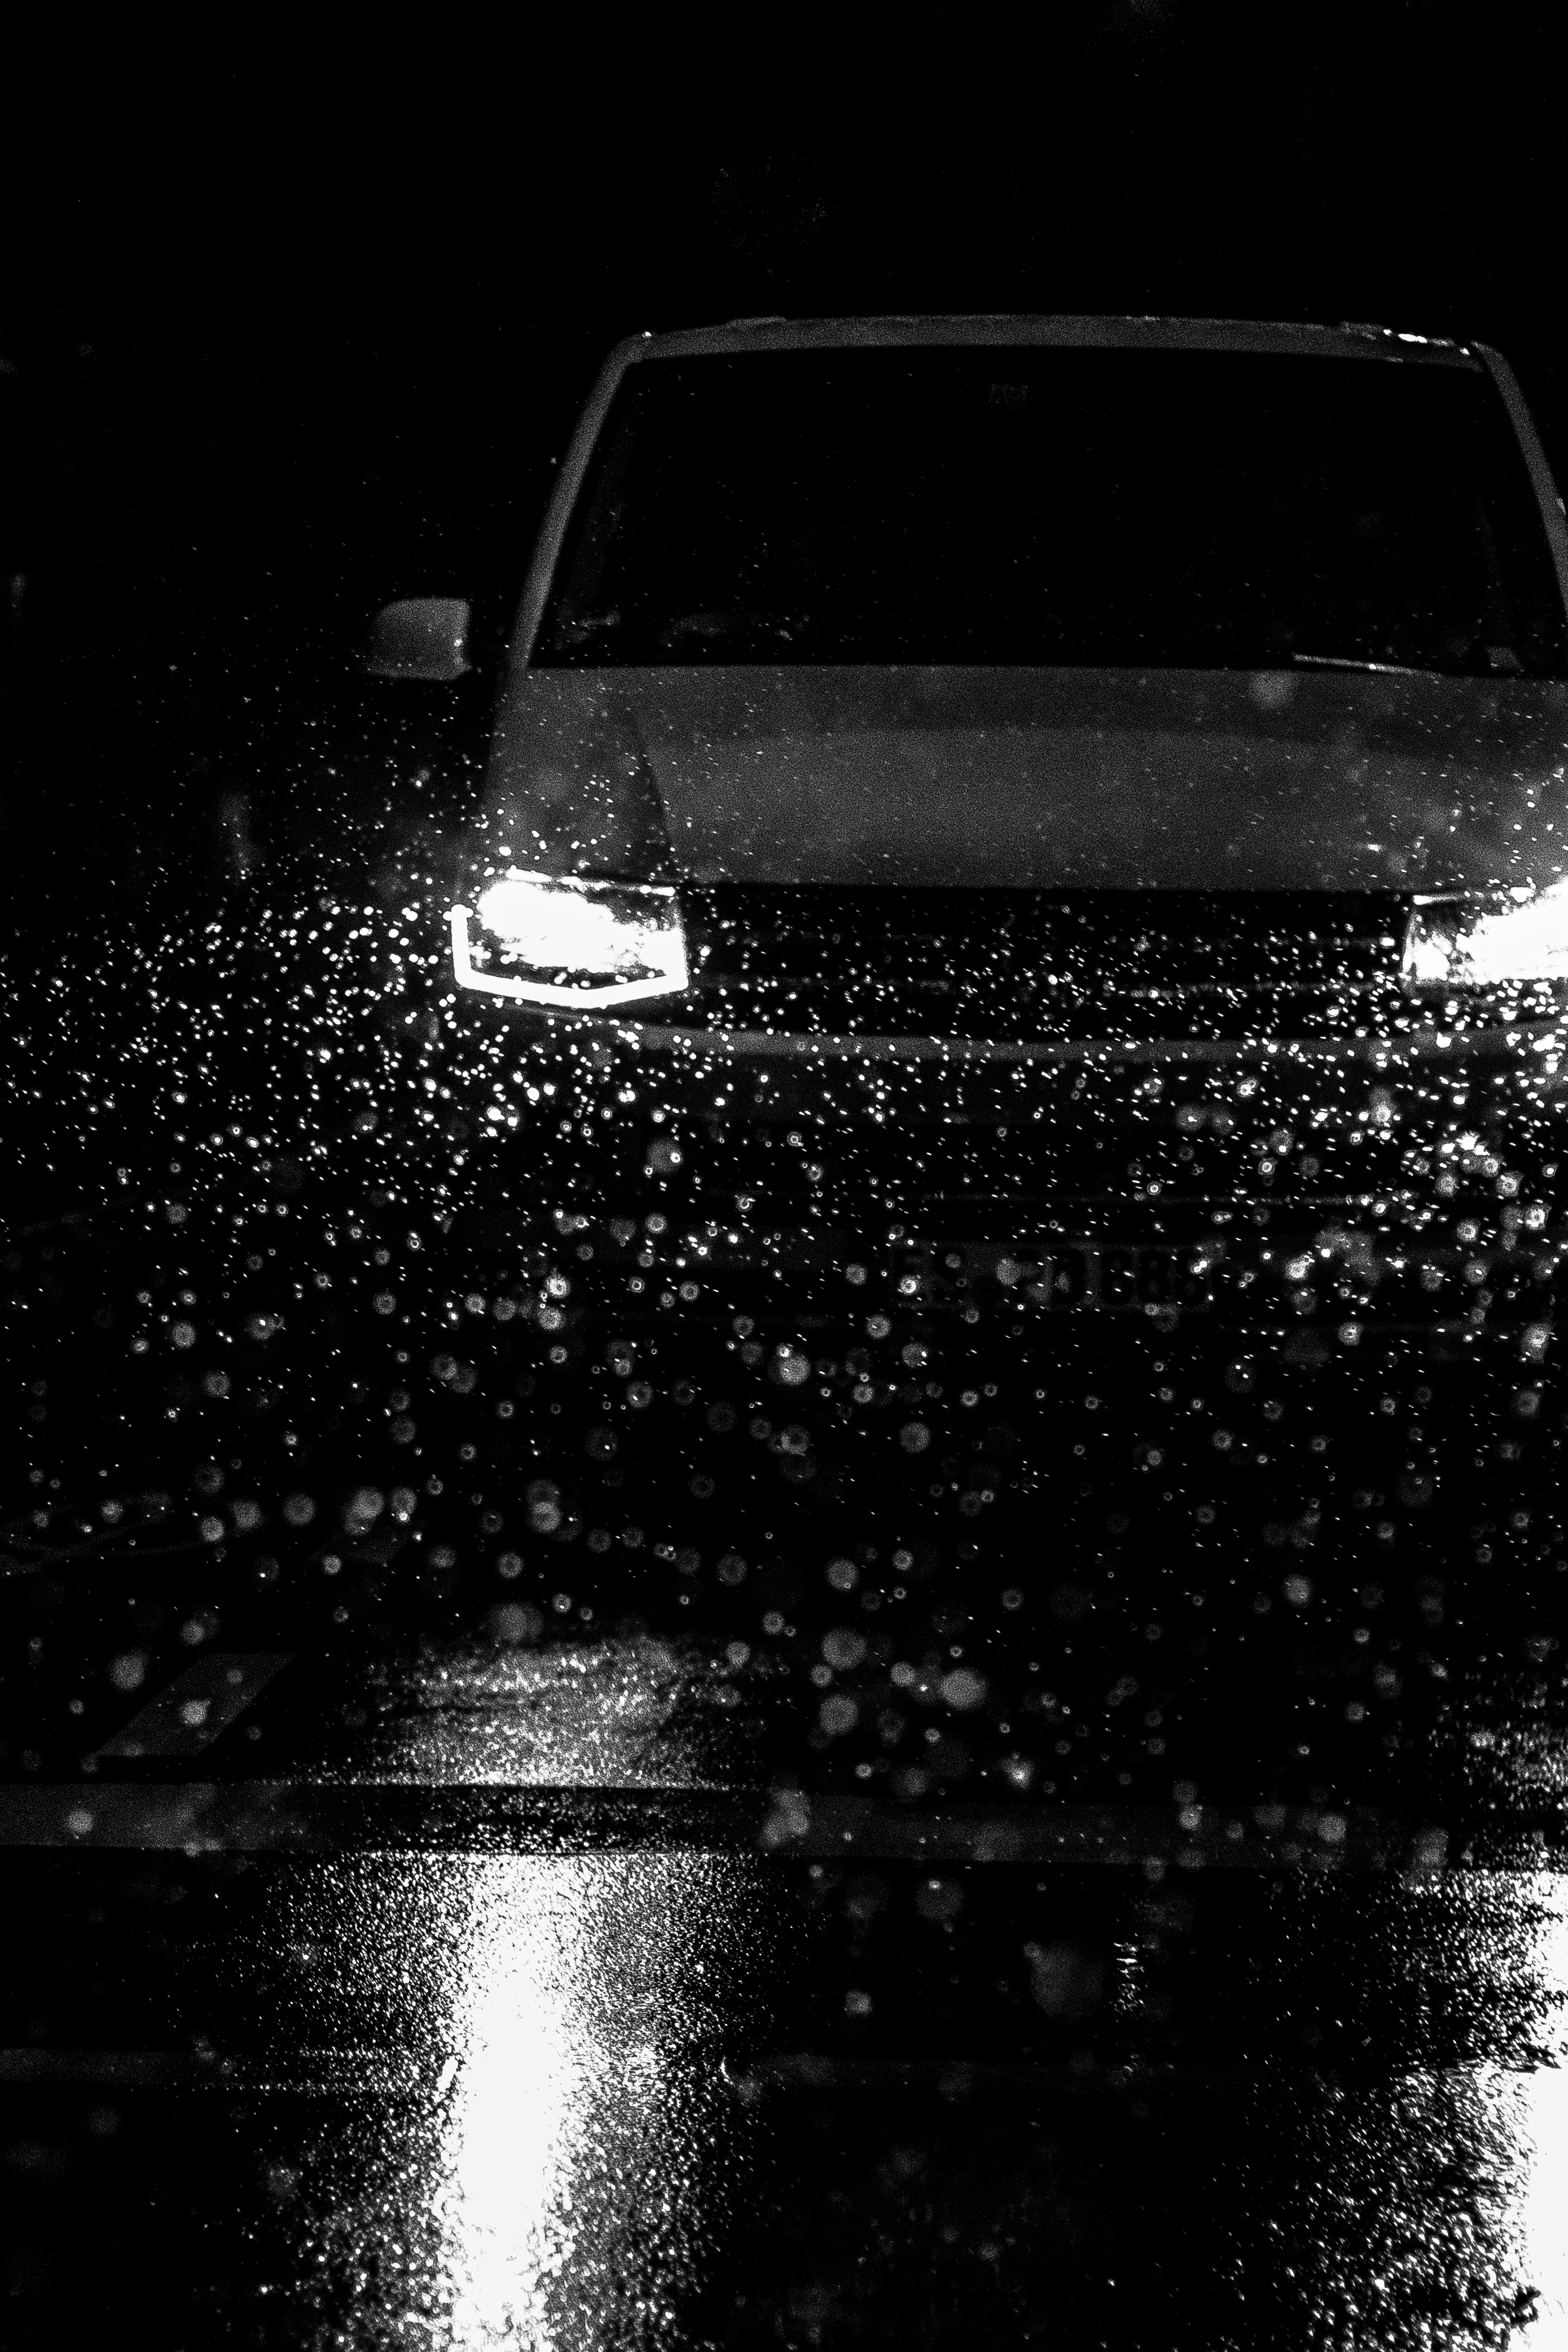 61922 download wallpaper headlights, rain, drops, cars, lights, car, machine, bw, chb screensavers and pictures for free